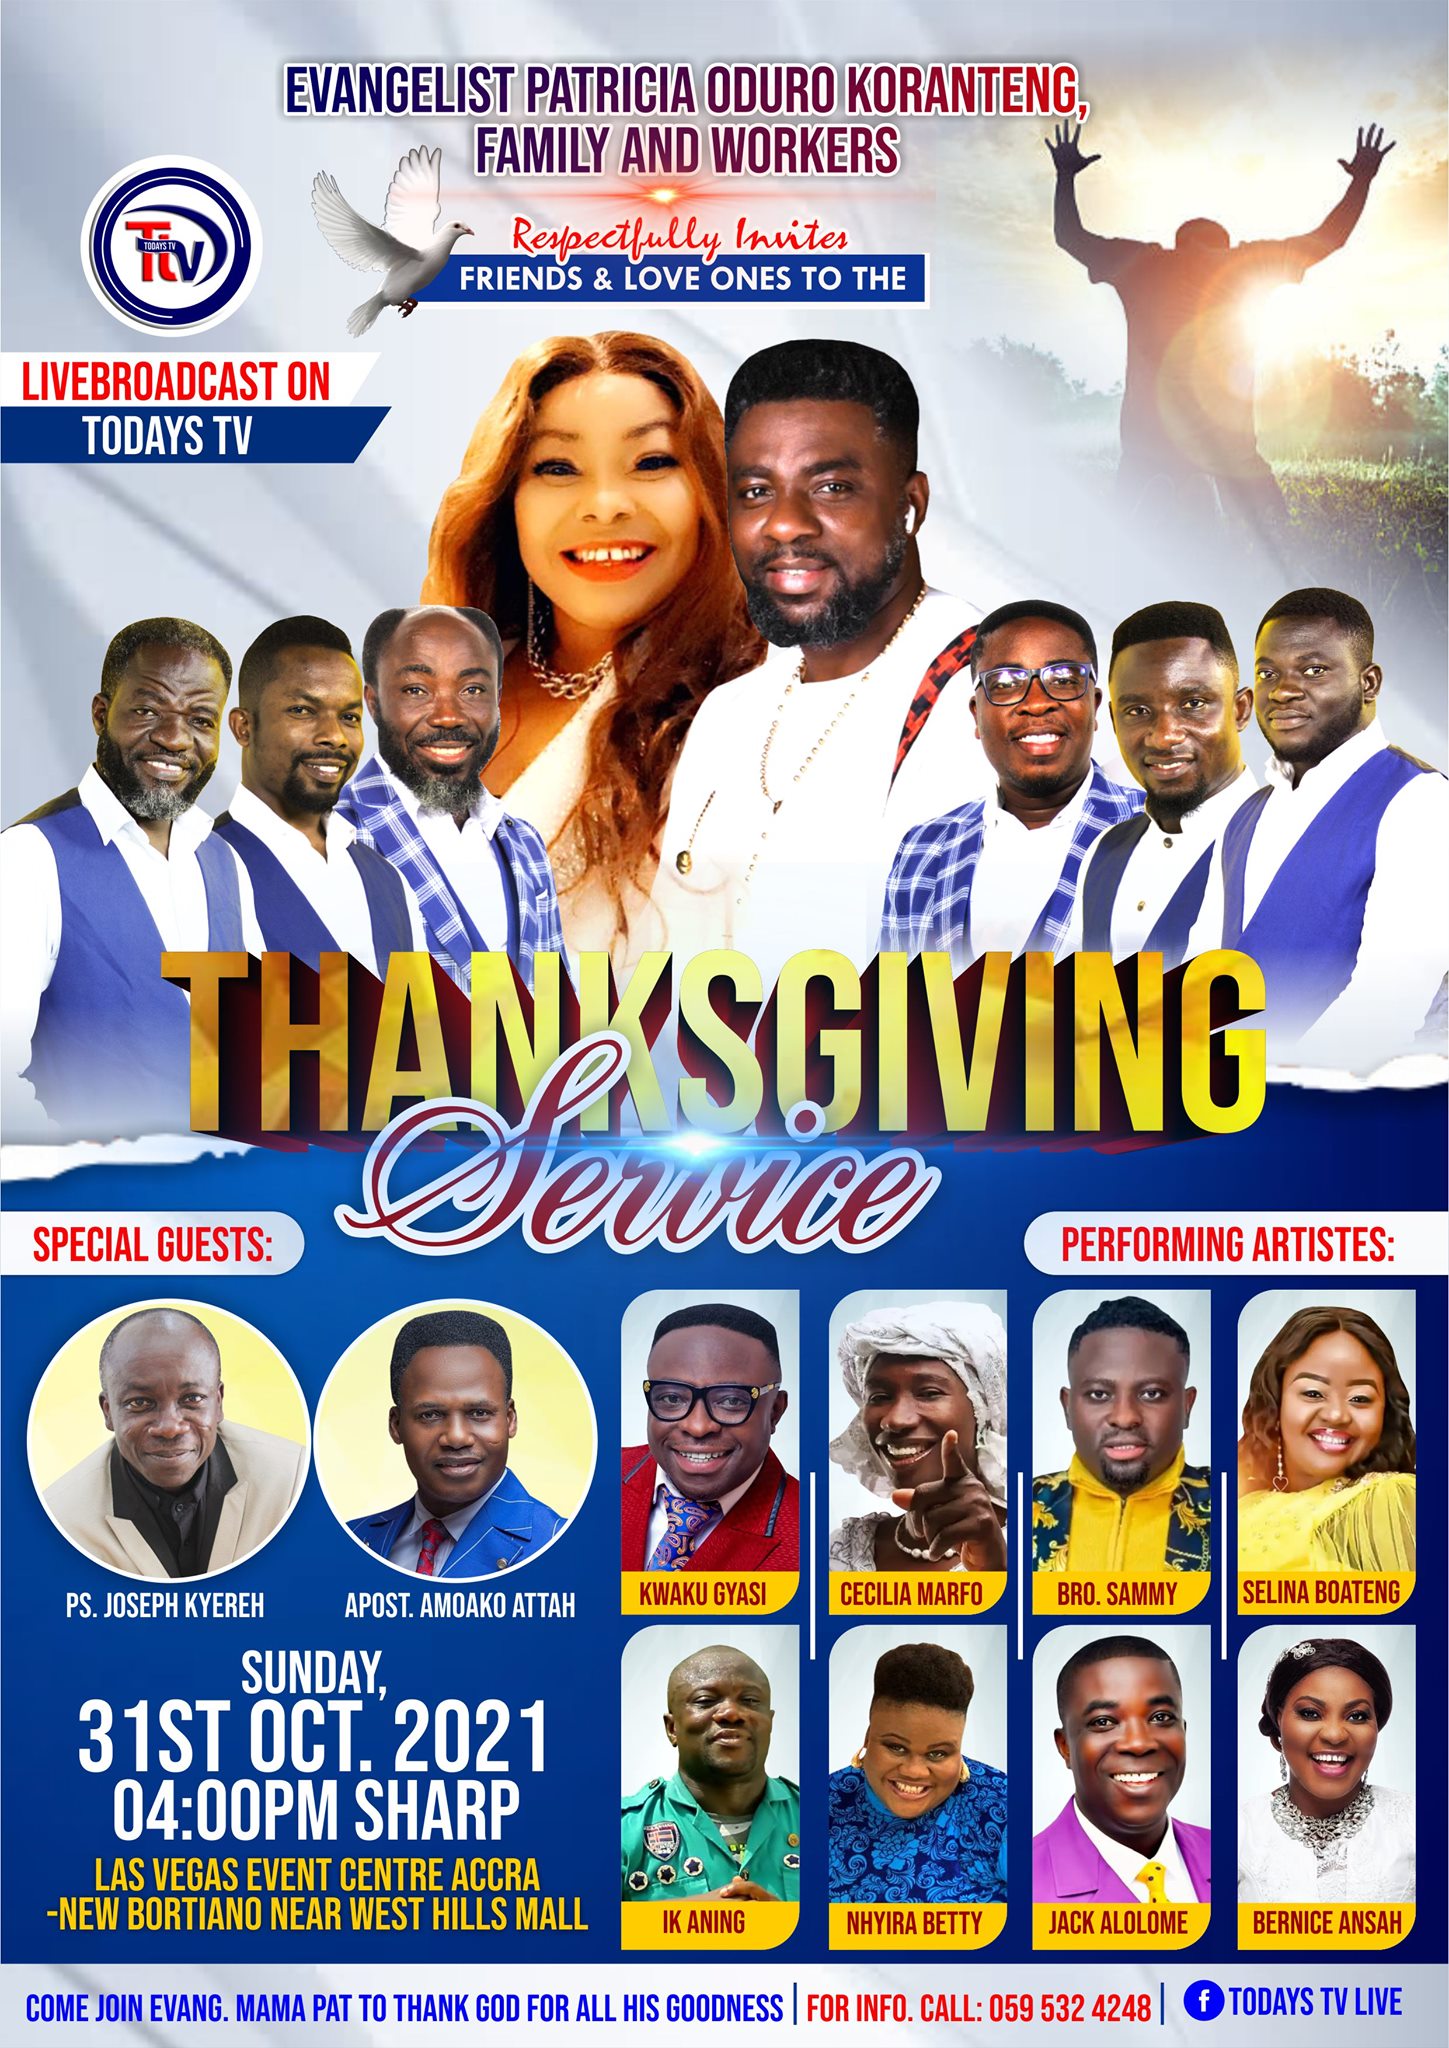 Evangelist Nana Agradaa succumbs to Joyce Blessing's threat; removes her photo from her event poster